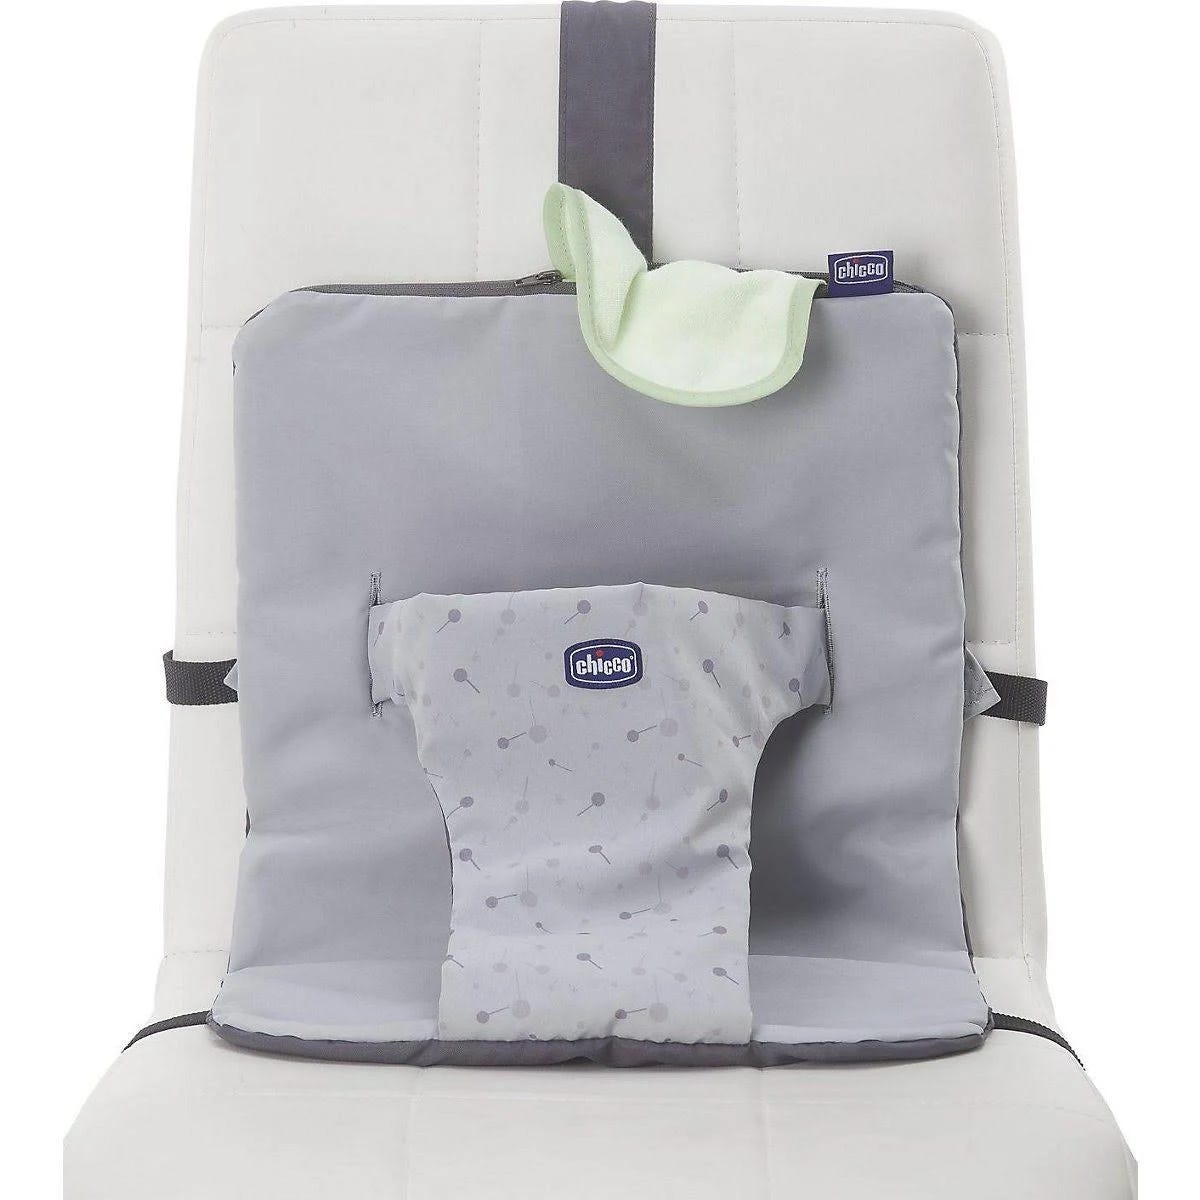 Chicco Wrappy Seat: Lightweight Travel Booster Seat for Infants and Toddlers | Image